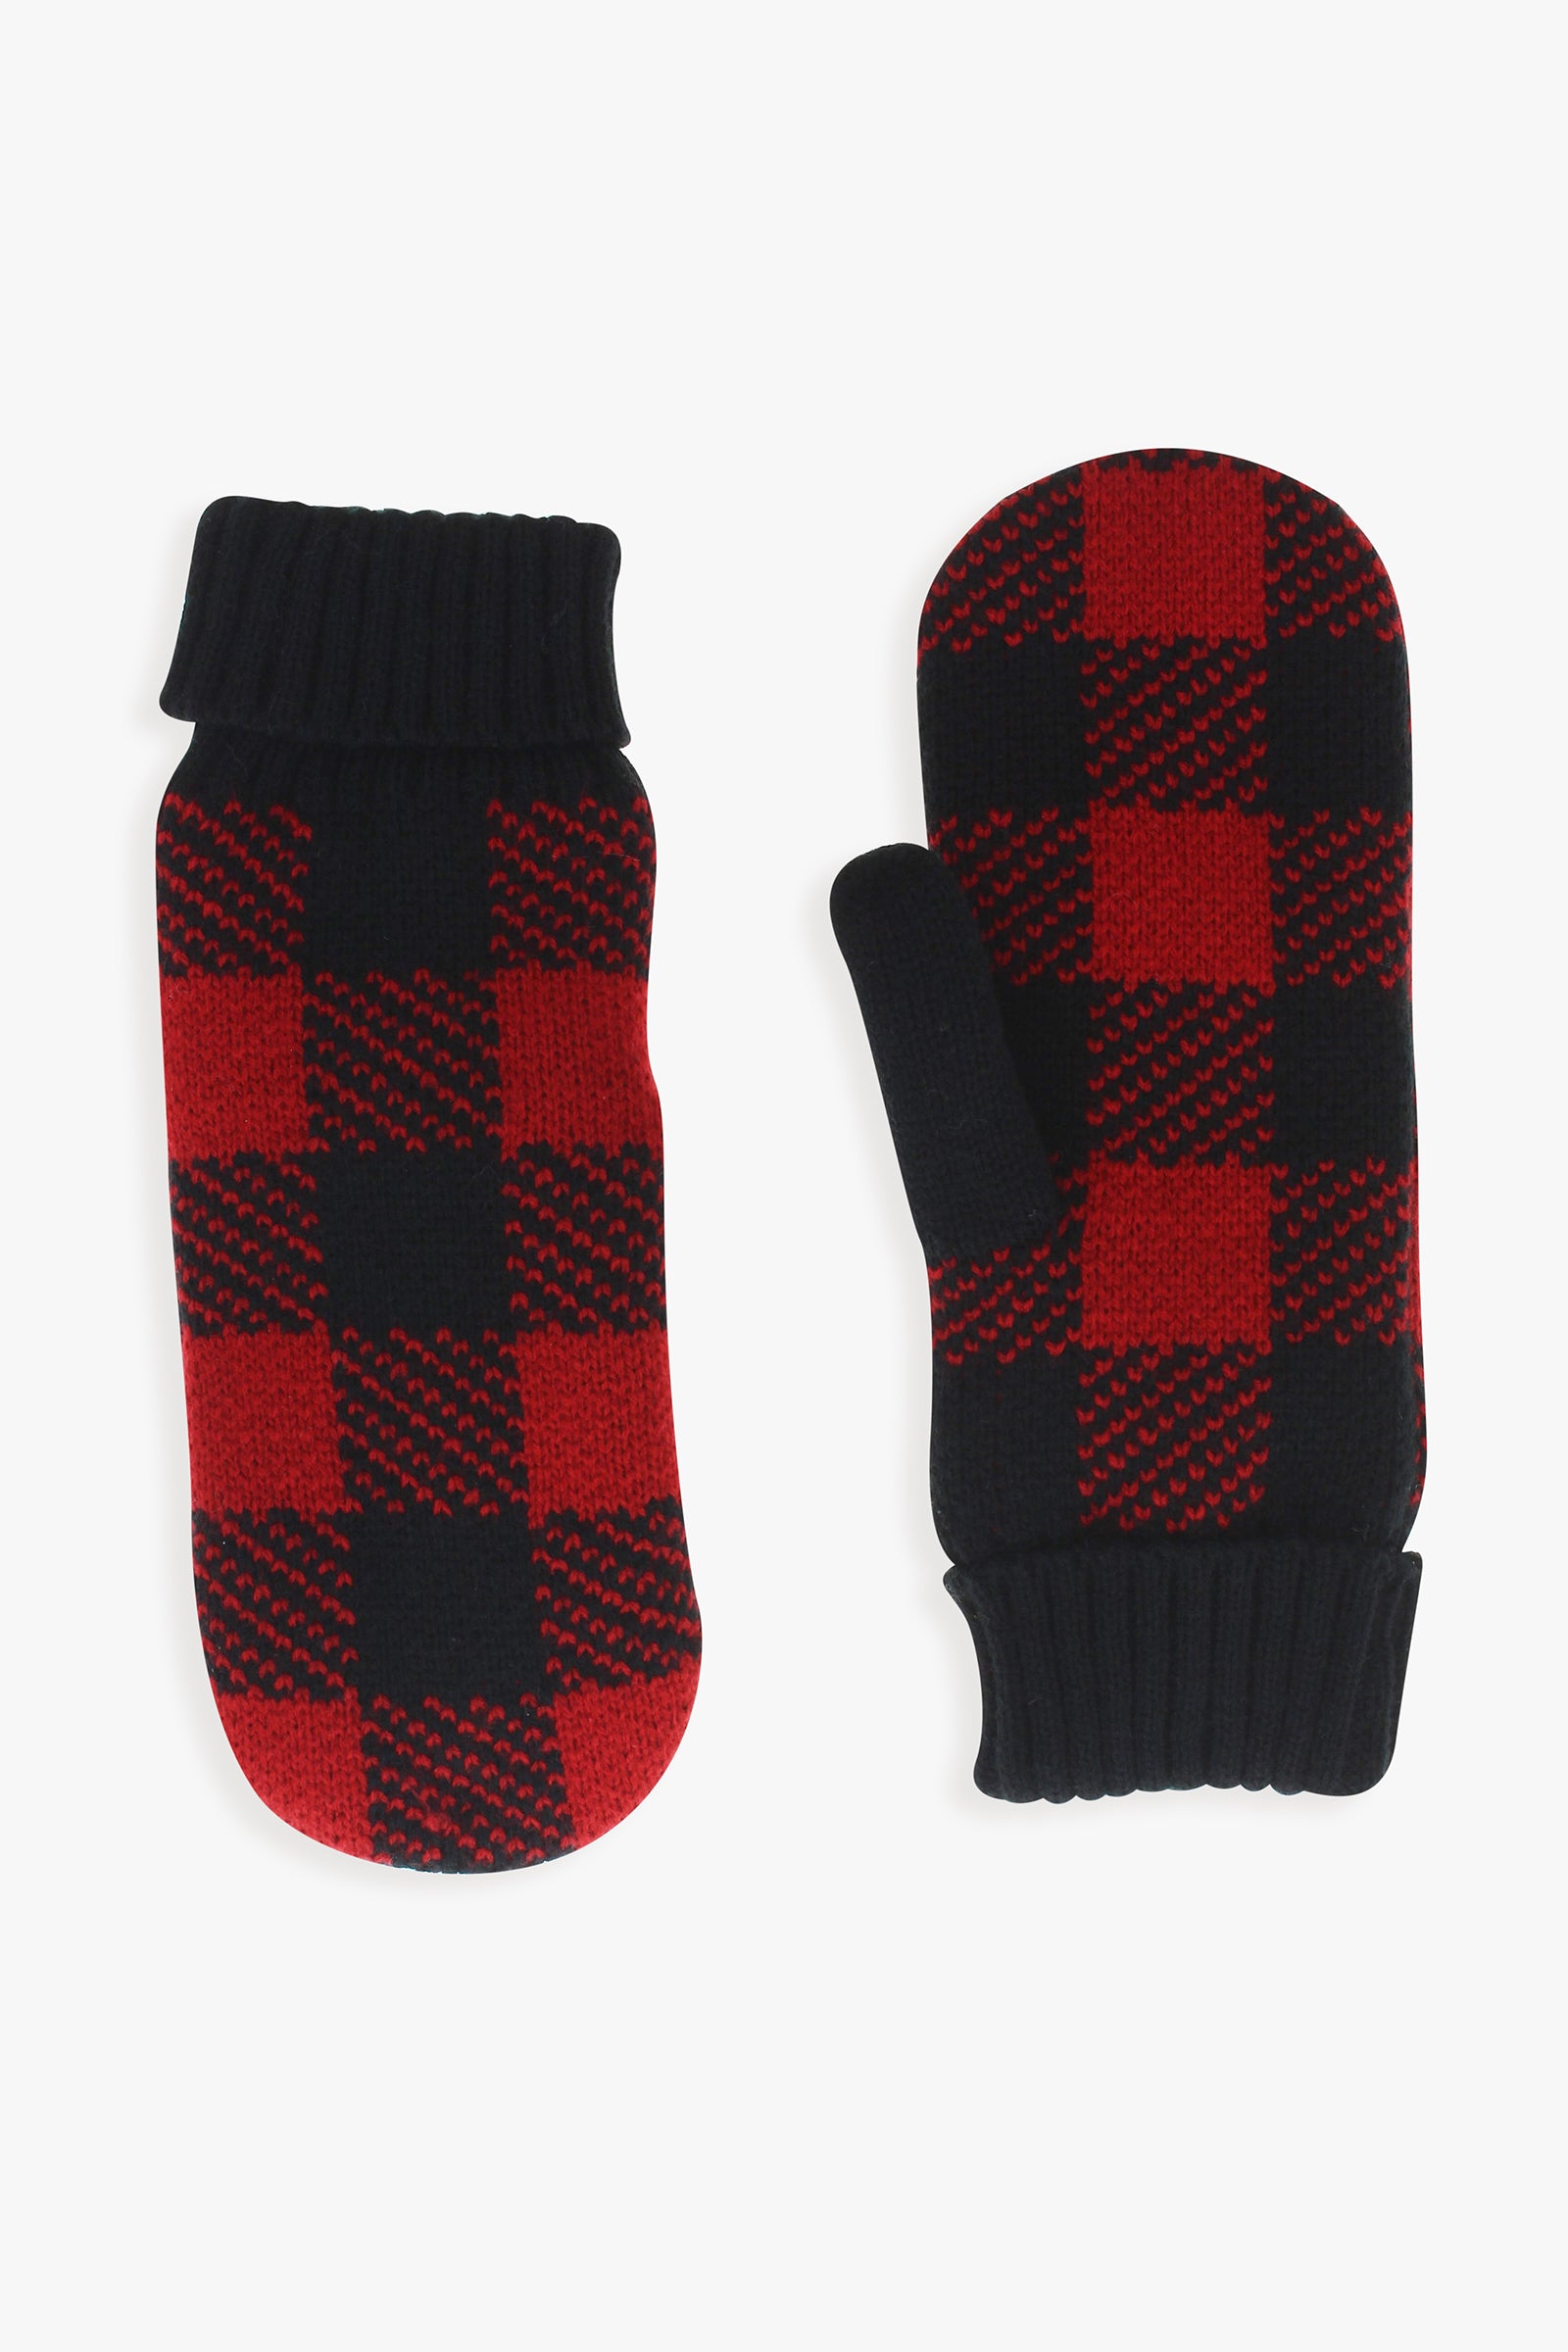 Plaid Ladies Faux Shearling Lined Mittens